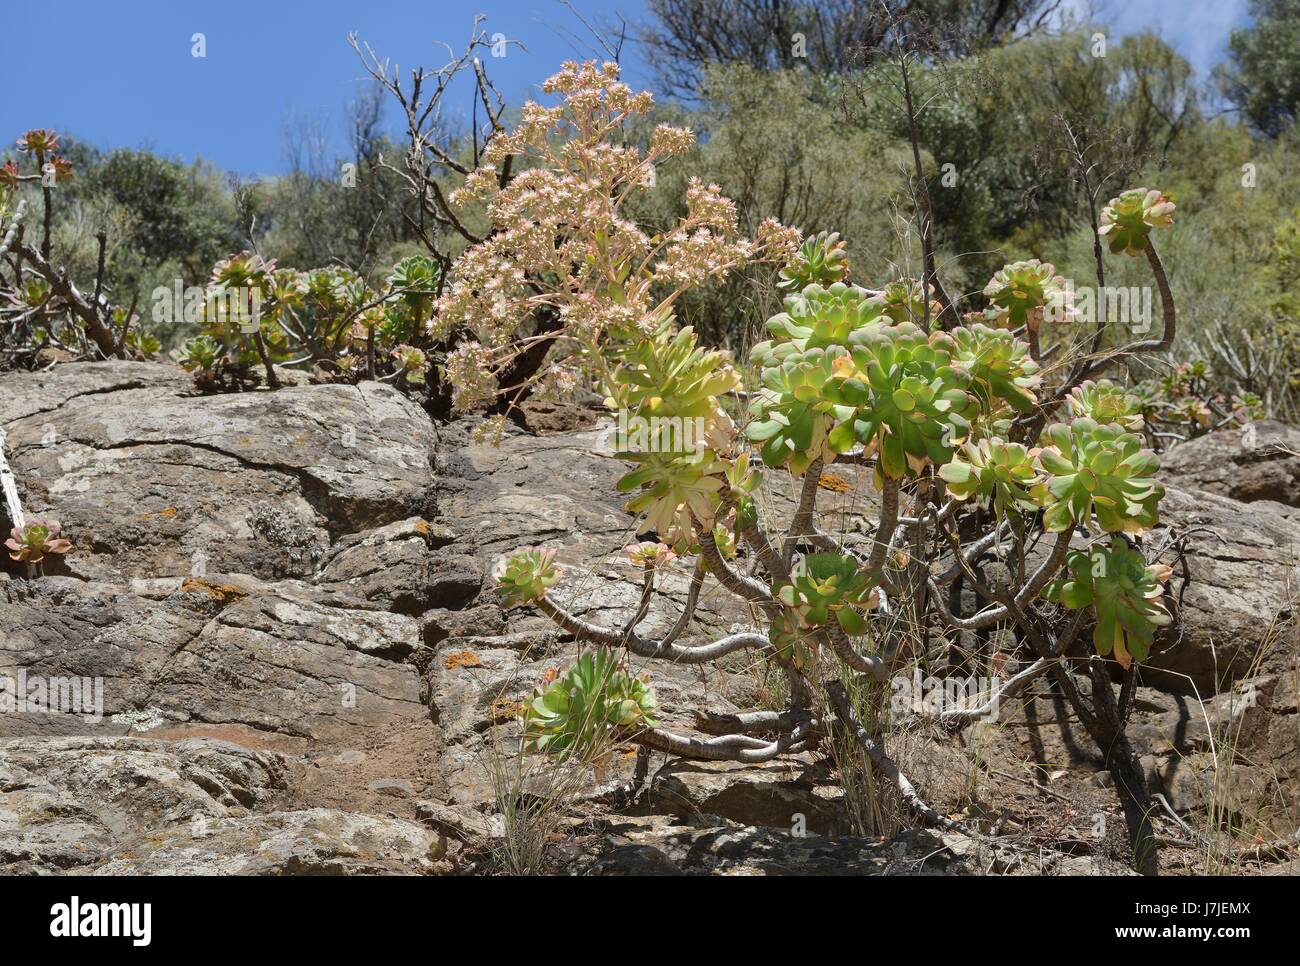 Endemic Aeonium / Tree houseleek (Aeonium percarneum), a large pink flowered species endemic to Gran Canaria, flowering in  a montane valley. Stock Photo